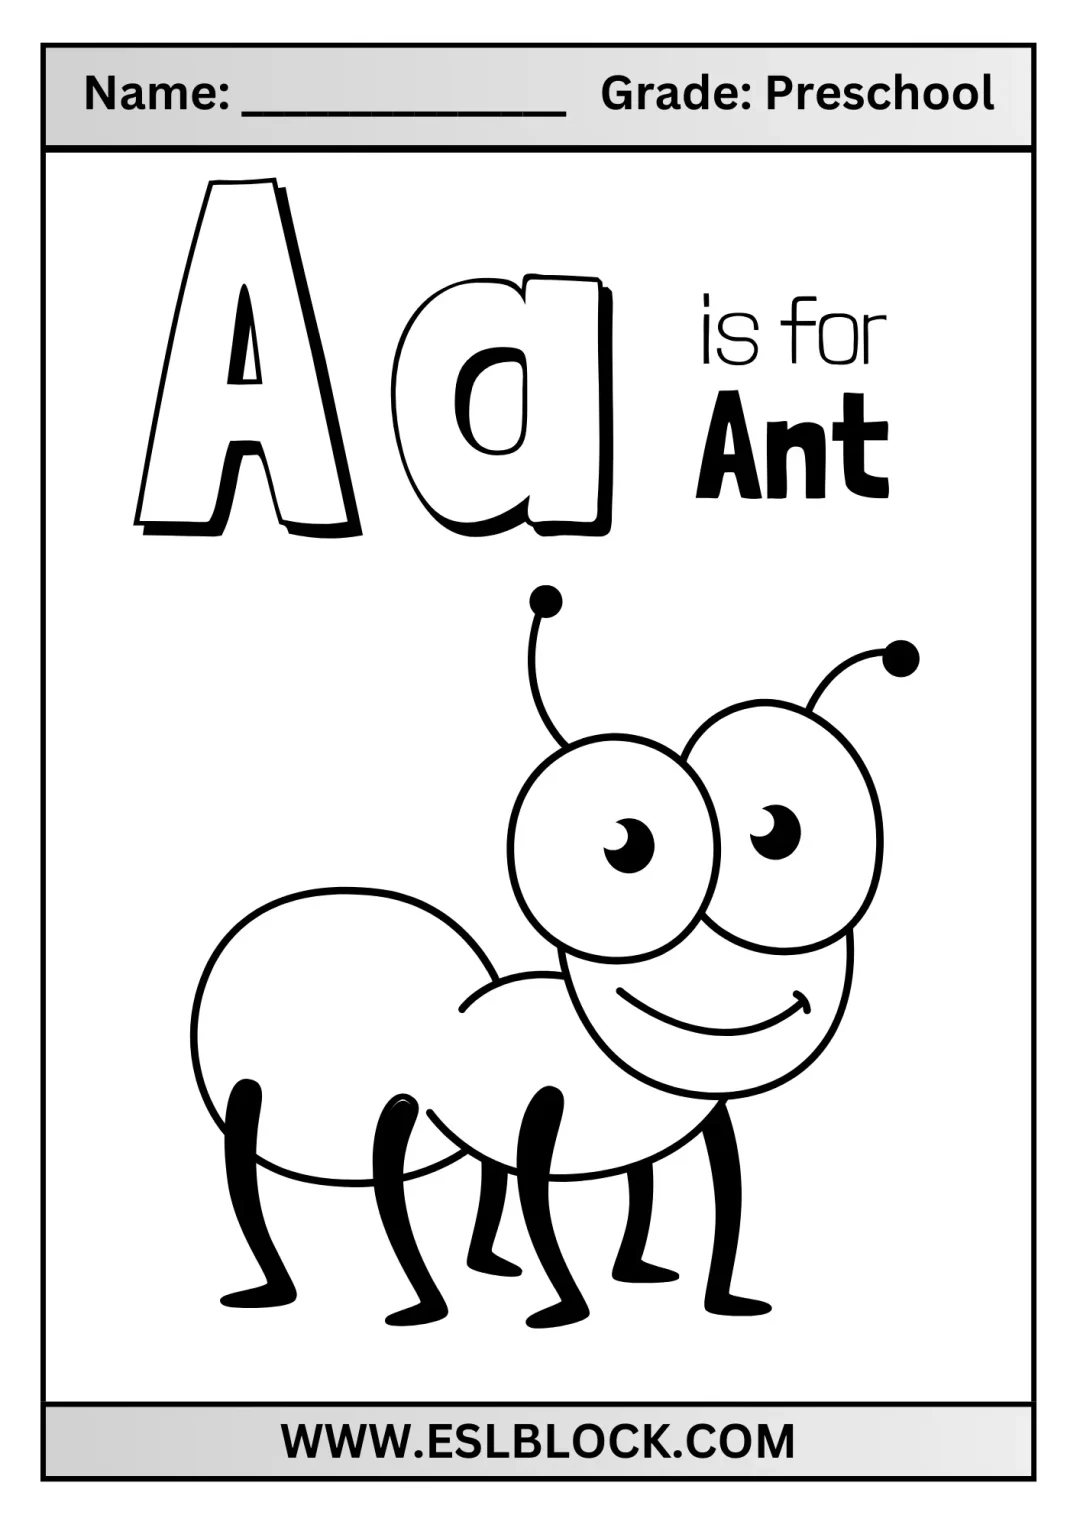 Printable Letter A coloring page Worksheet